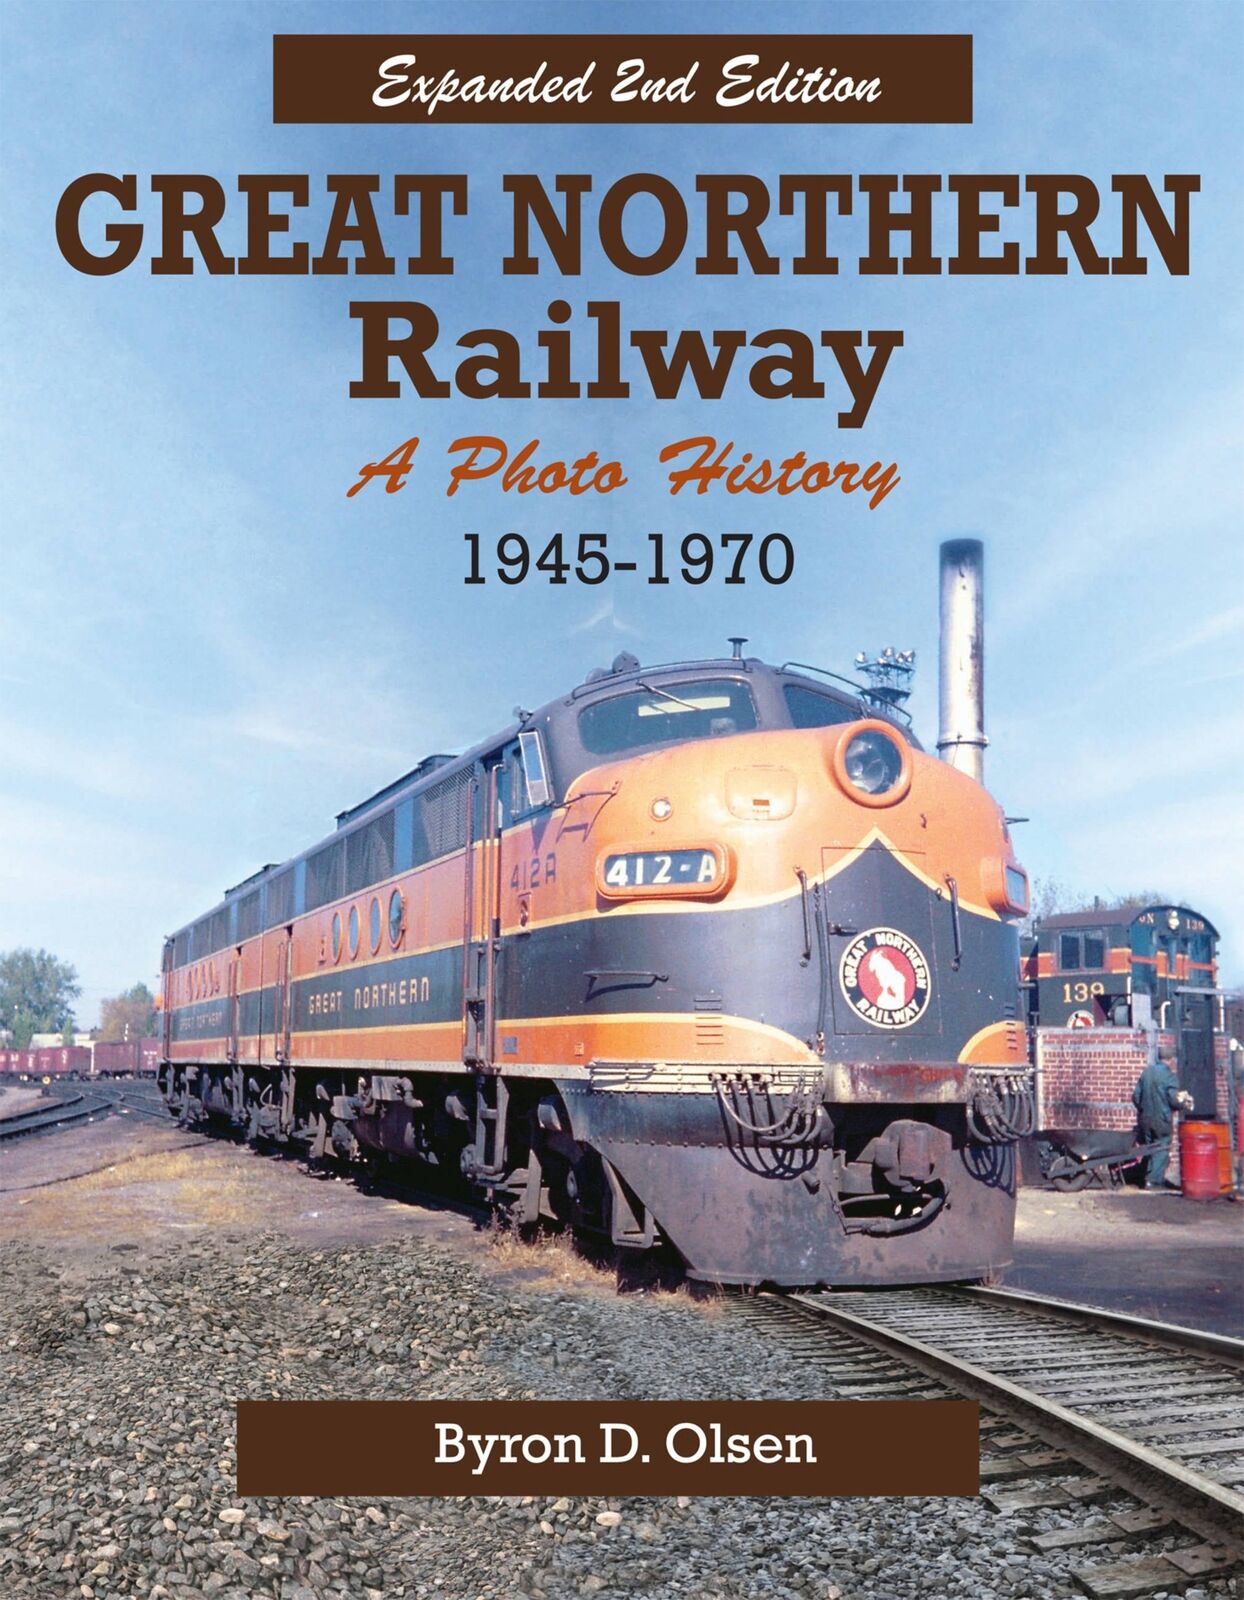 Great Northern Railway: A Photo History 1945-1970 book